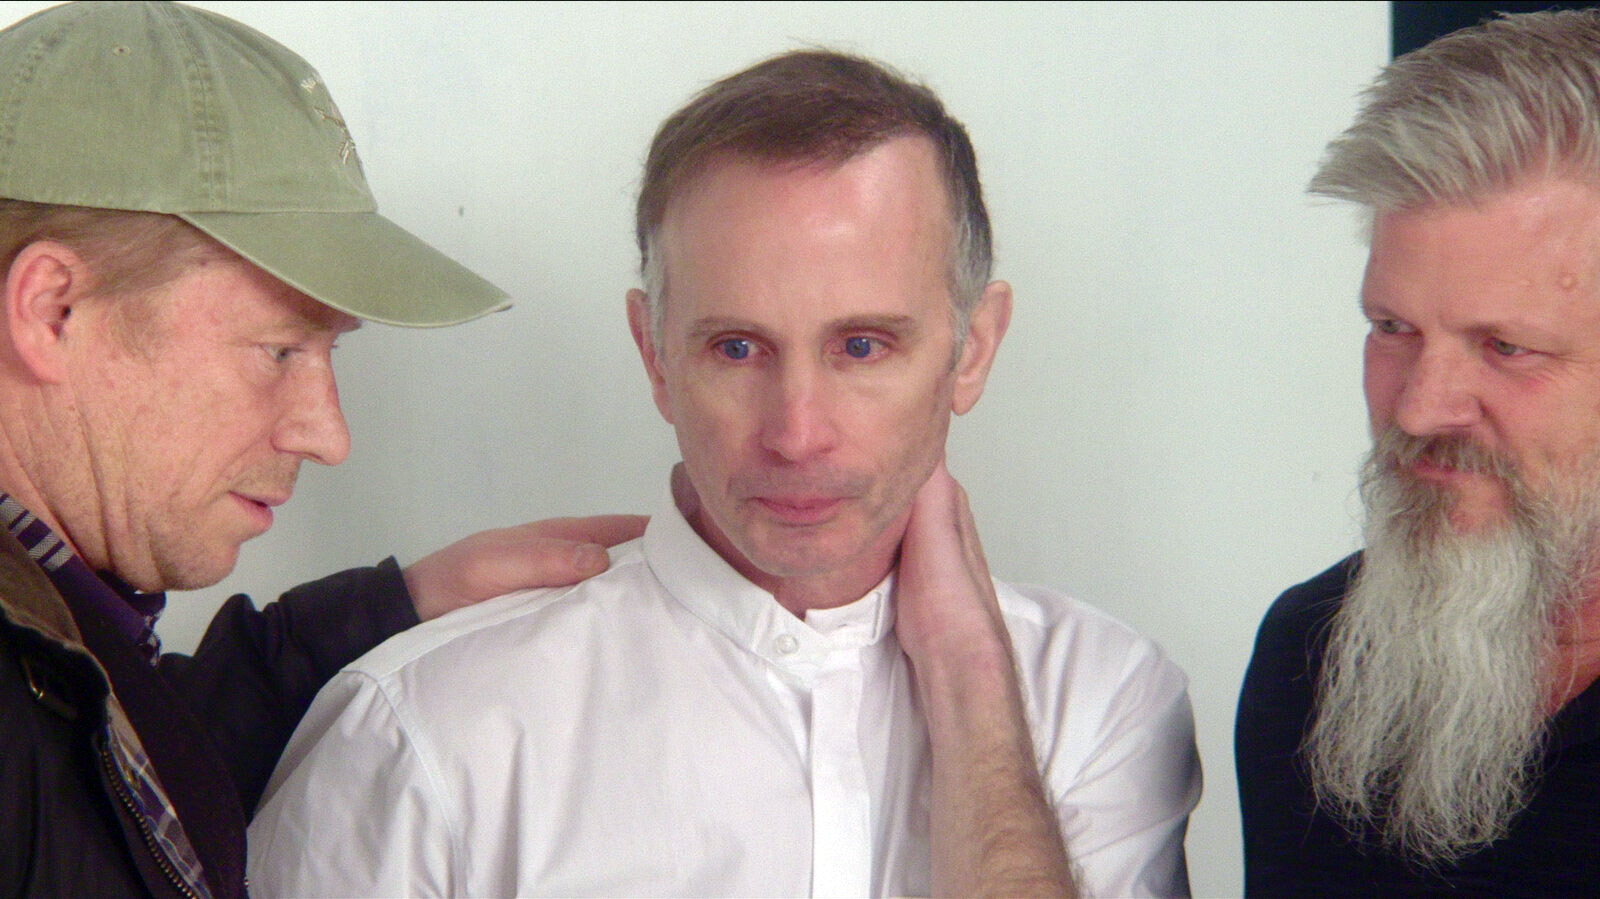 Ed Gavagan, from left, Michael Sandridge and Dan Laurine in the documentary “Procession.” Image courtesy of Netflix